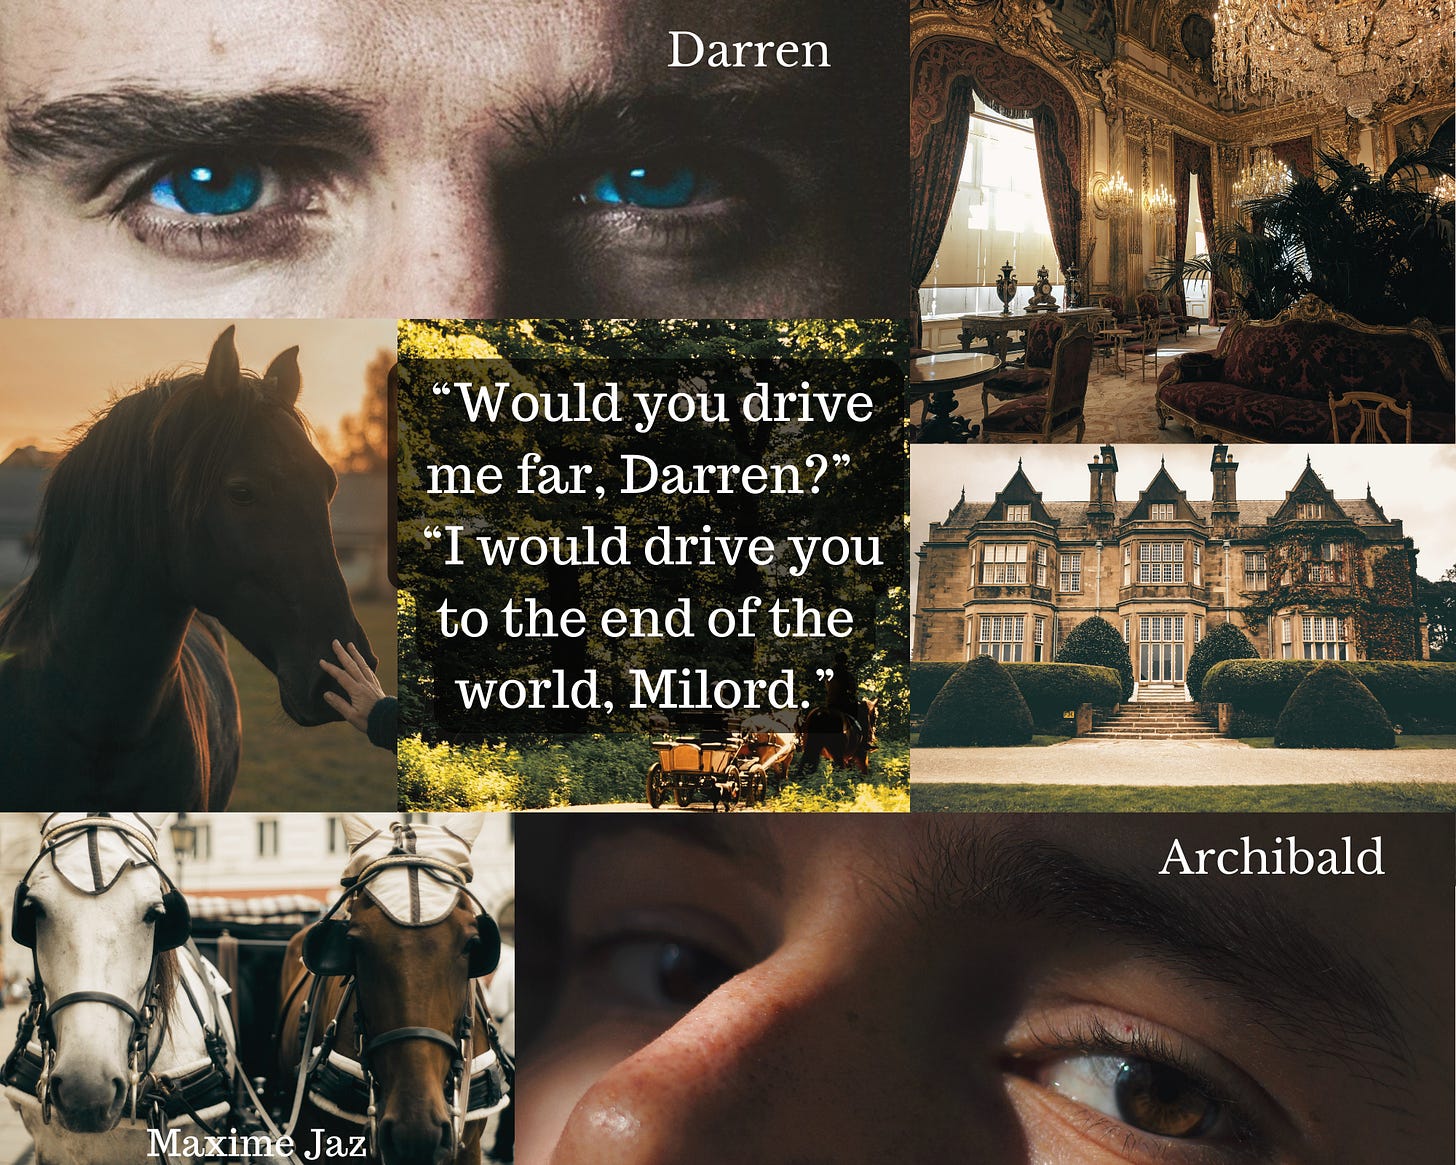 Moodboard with quote, background pic is a forest path with a carriage on it. Left side top to bottom a man's blue eyes, caption Darren, a black horse, his nose stroked by a hand, two horses tied into a carriage, a bay and a grey one. Right side a lavish living room in red and gold, a mansion with hedges, a man's brown eyes, caption Archibald. Quote in the middle "Would you drive me far, Darren?" "I would drive you to the end of the world, Milord."